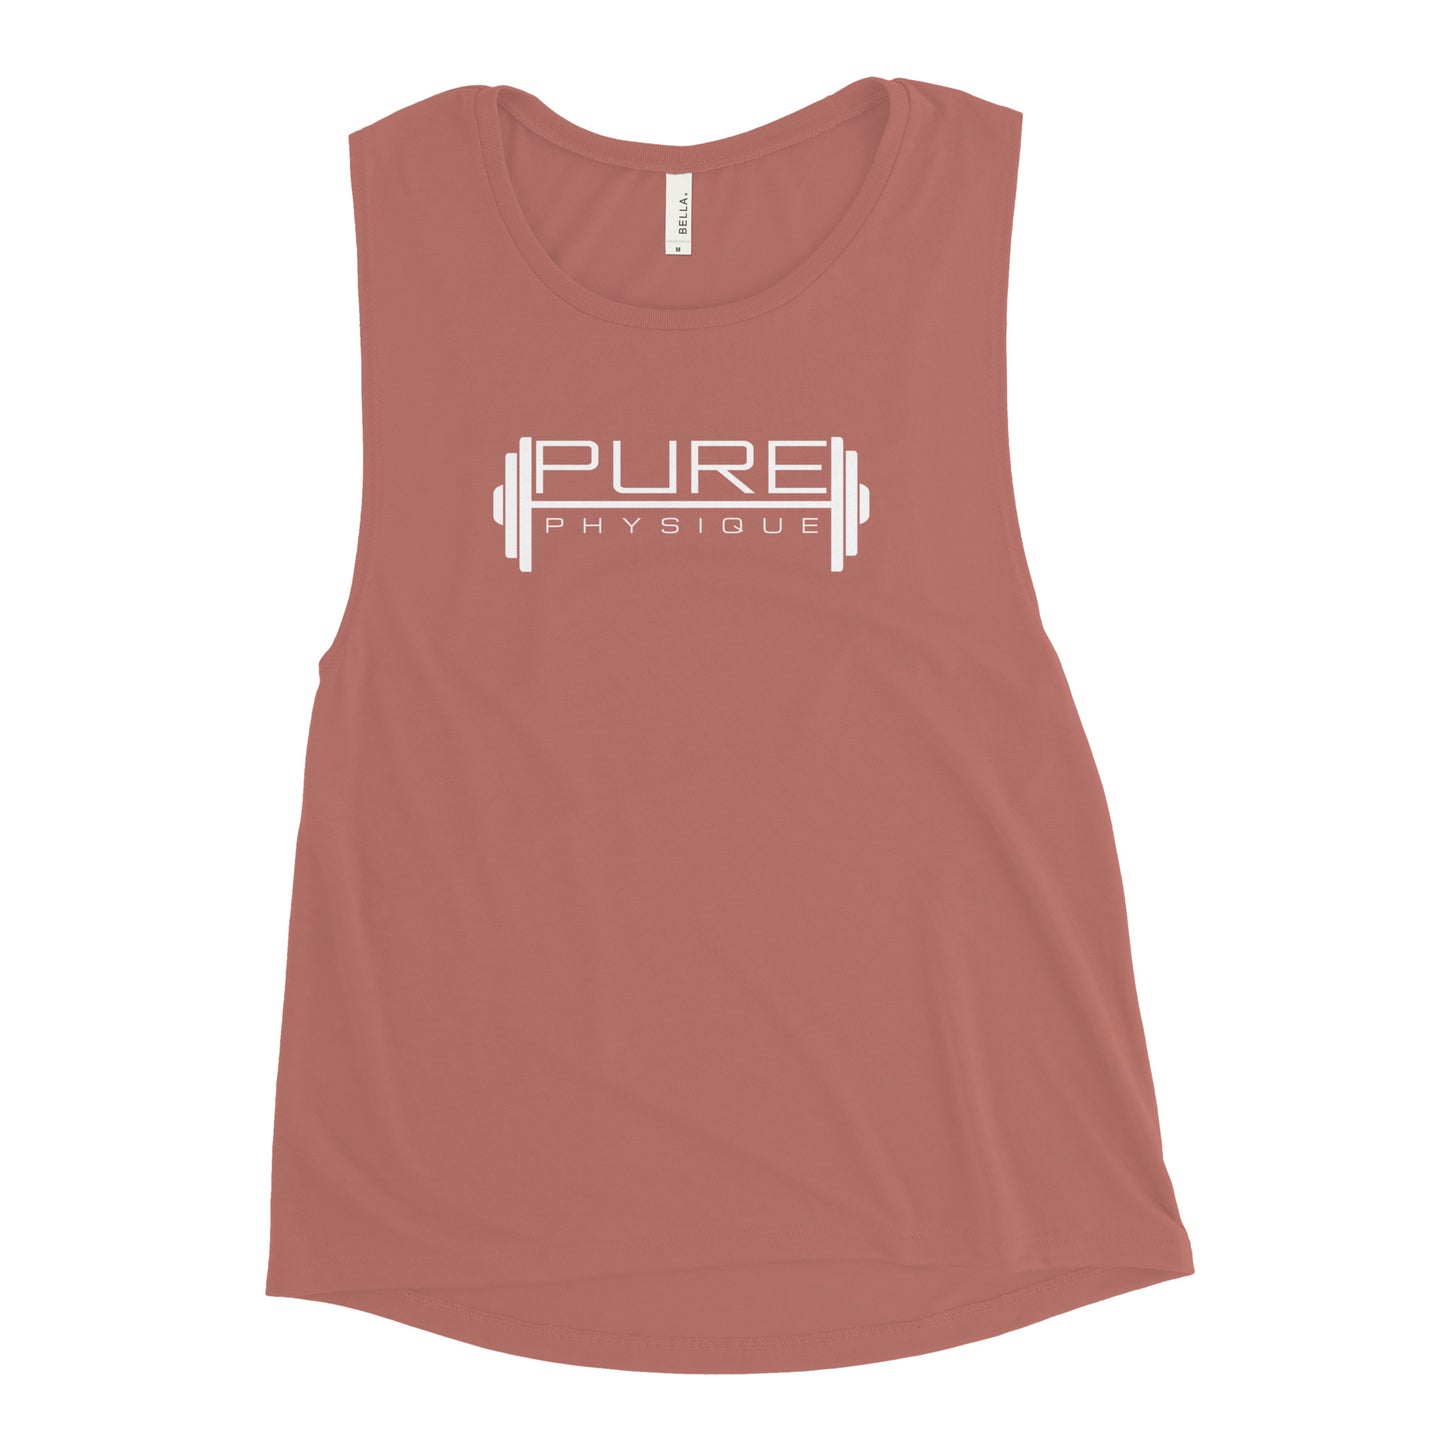 "PURE PHYSIQUE" Ladies’ Muscle Tank